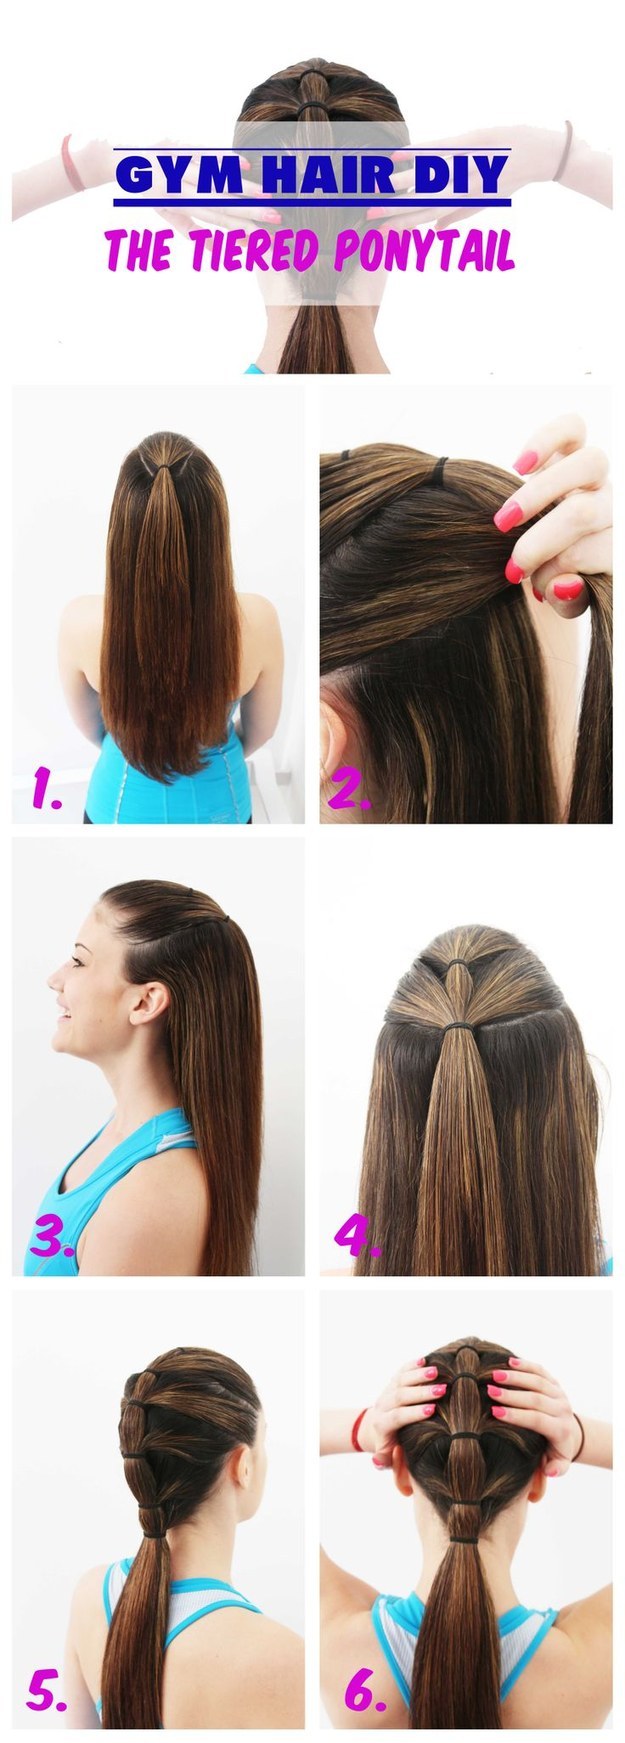 33 COOL HAIRSTYLE TRICKS AND HACKS  YouTube